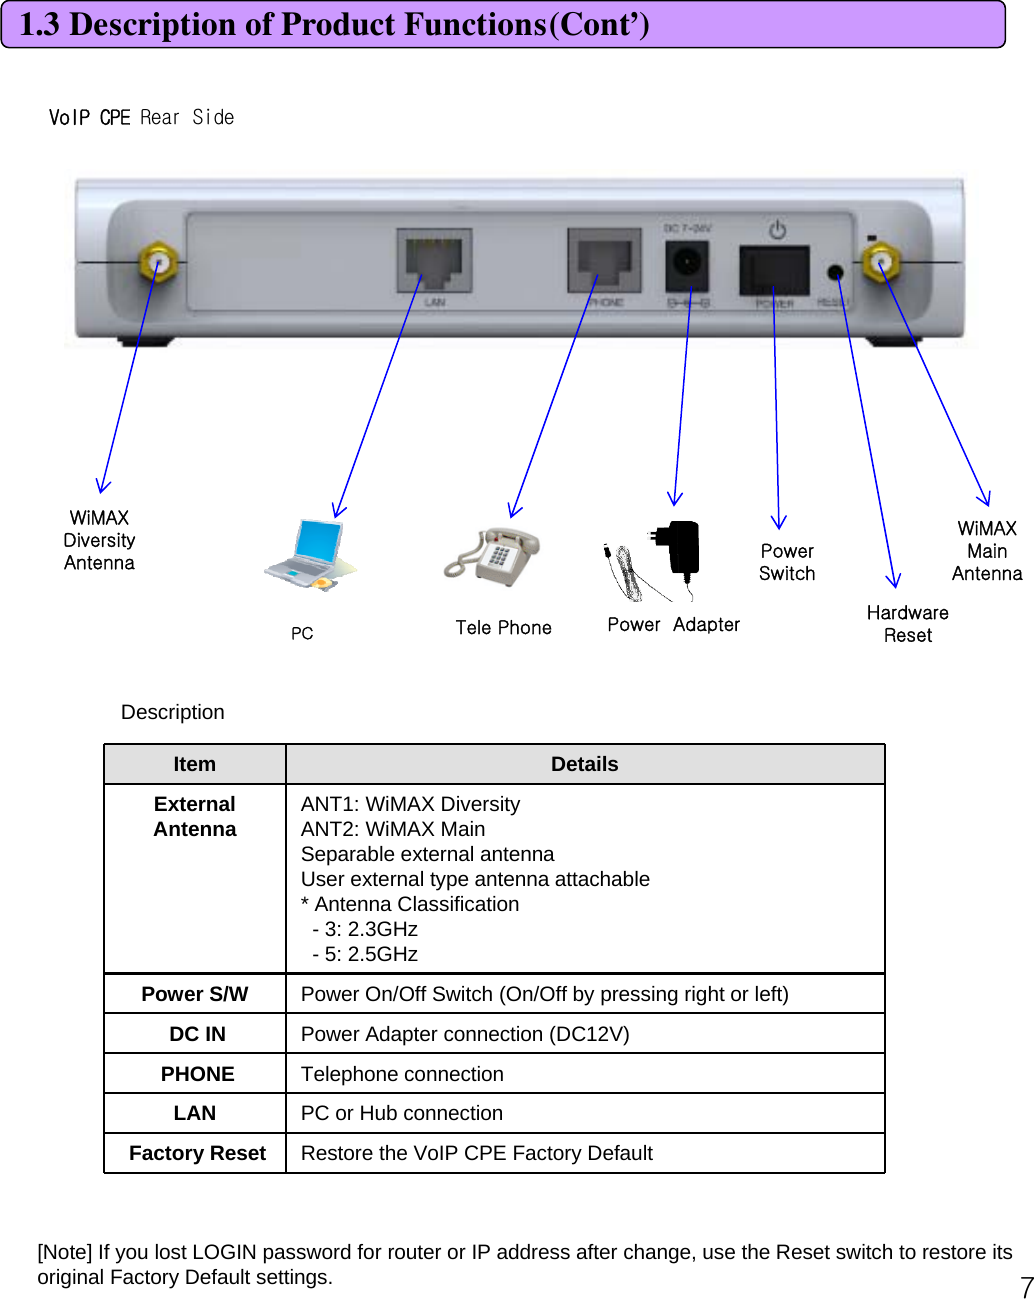 71.3 Description of Product Functions(Cont’)VoIP CPE Rear SideDescriptionItem DetailsExternal Antenna ANT1: WiMAX DiversityANT2: WiMAX MainSeparable external antennaUser external type antenna attachable* Antenna Classification-3: 2.3GHz-5: 2.5GHzPower S/W Power On/Off Switch (On/Off by pressing right or left) DC IN  Power Adapter connection (DC12V)PHONE  Telephone connectionLAN  PC or Hub connectionFactory Reset Restore the VoIP CPE Factory Default [Note] If you lost LOGIN password for router or IP address after change, use the Reset switch to restore its original Factory Default settings. WiMAXDiversity Antenna WiMAXMain  Antenna Power Switch Hardware ResetPC Tele Phone Power  Adapter